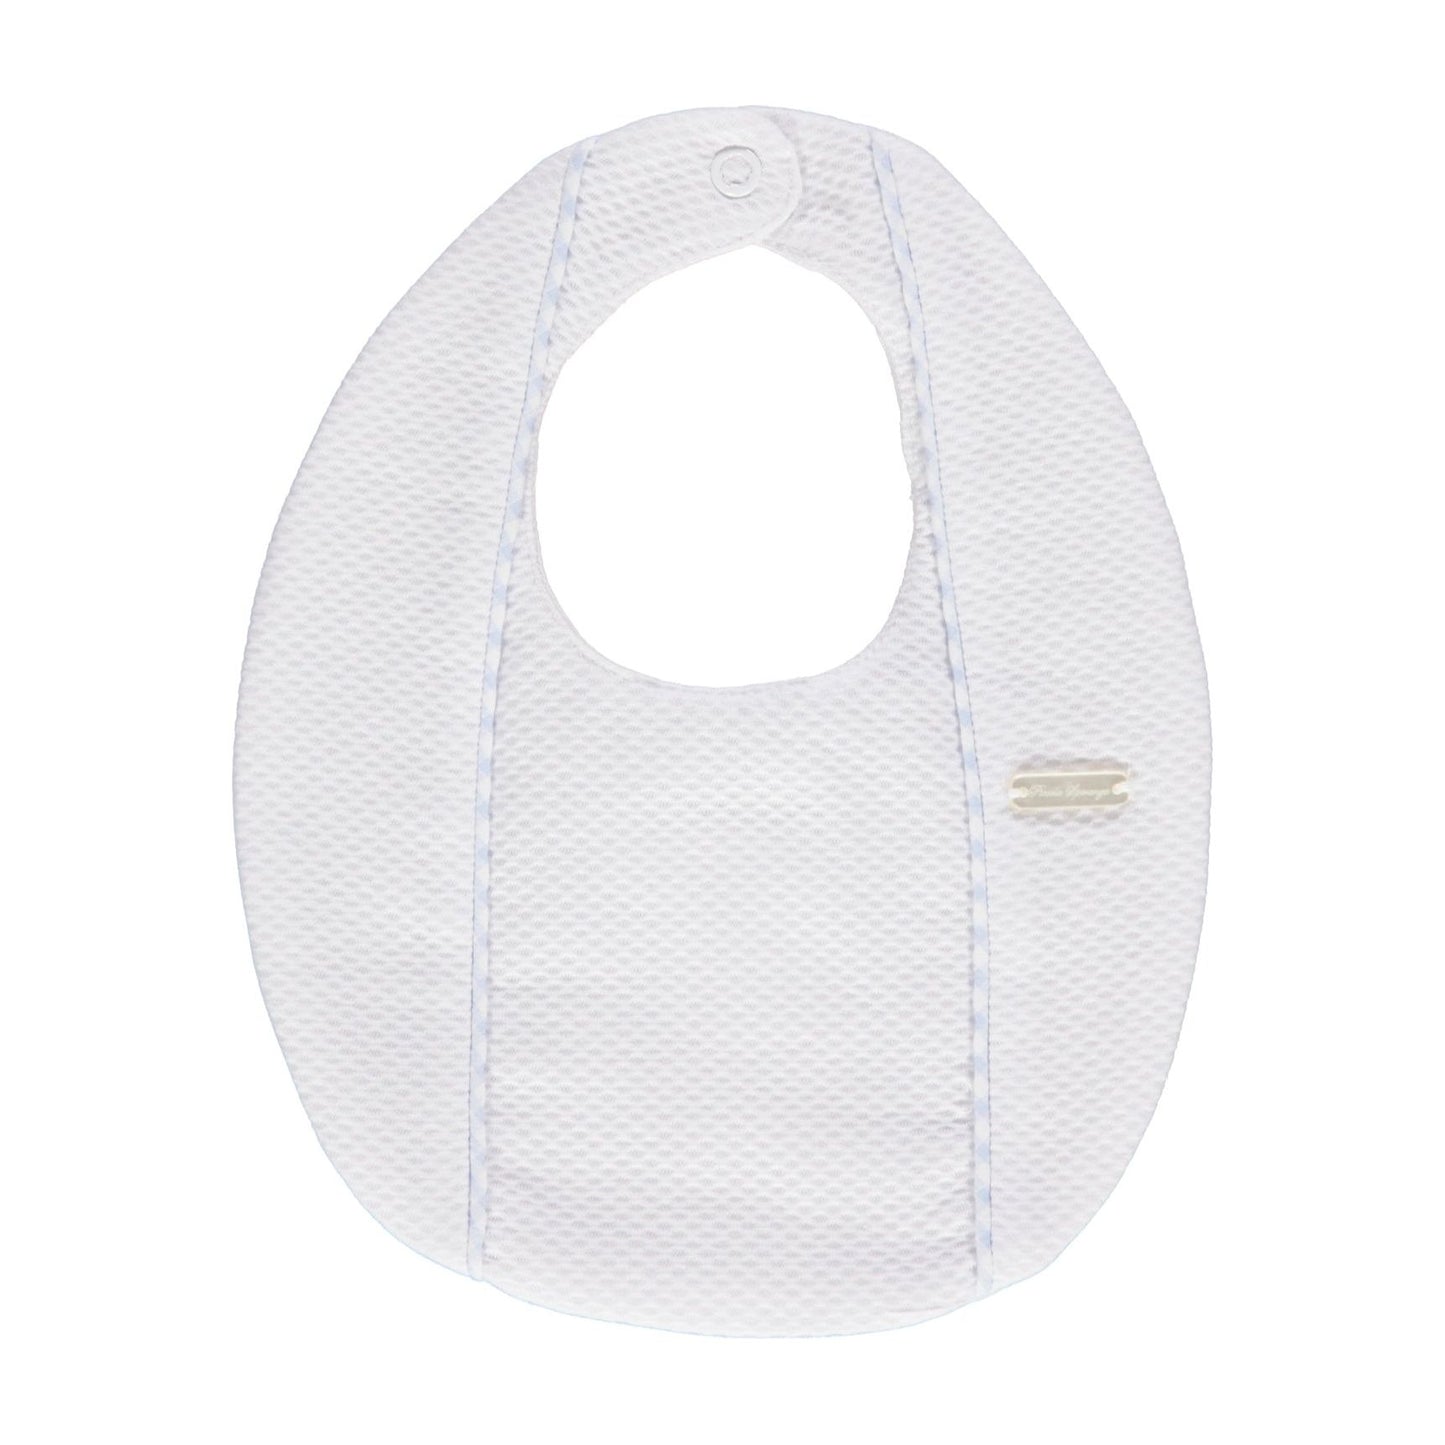 White cotton bib for baby boys with pale blue print